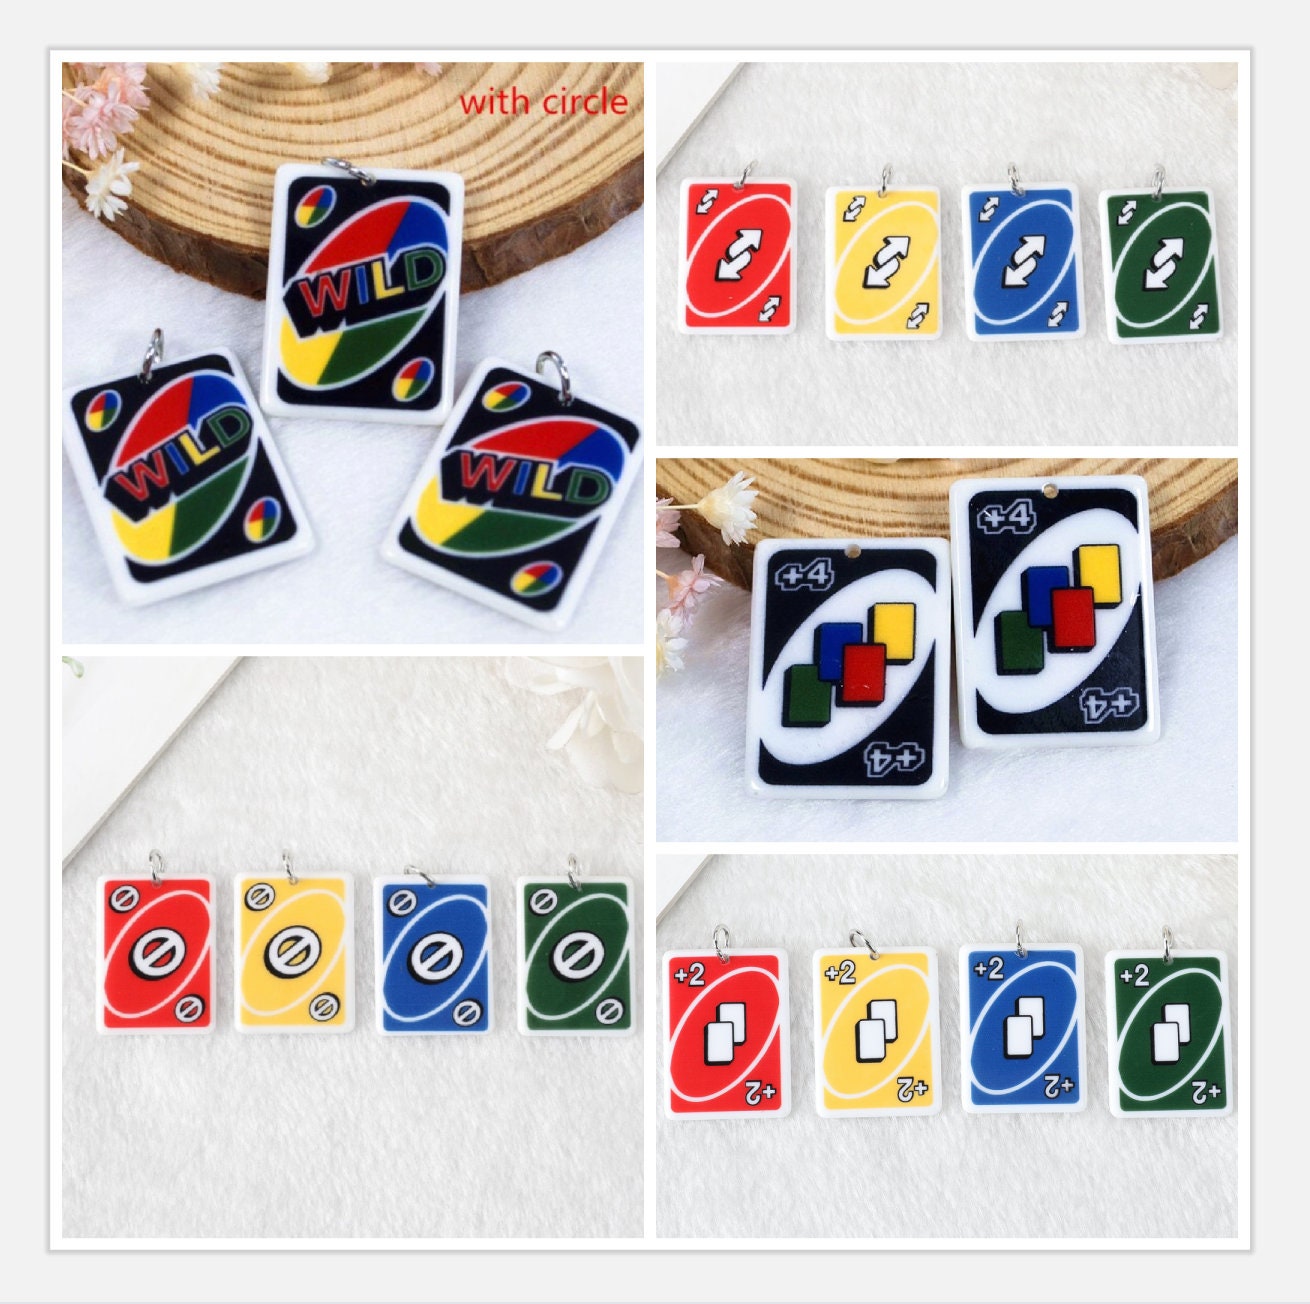 Uno Card Charms, UNO Cards Reverse, +Uno Game Card